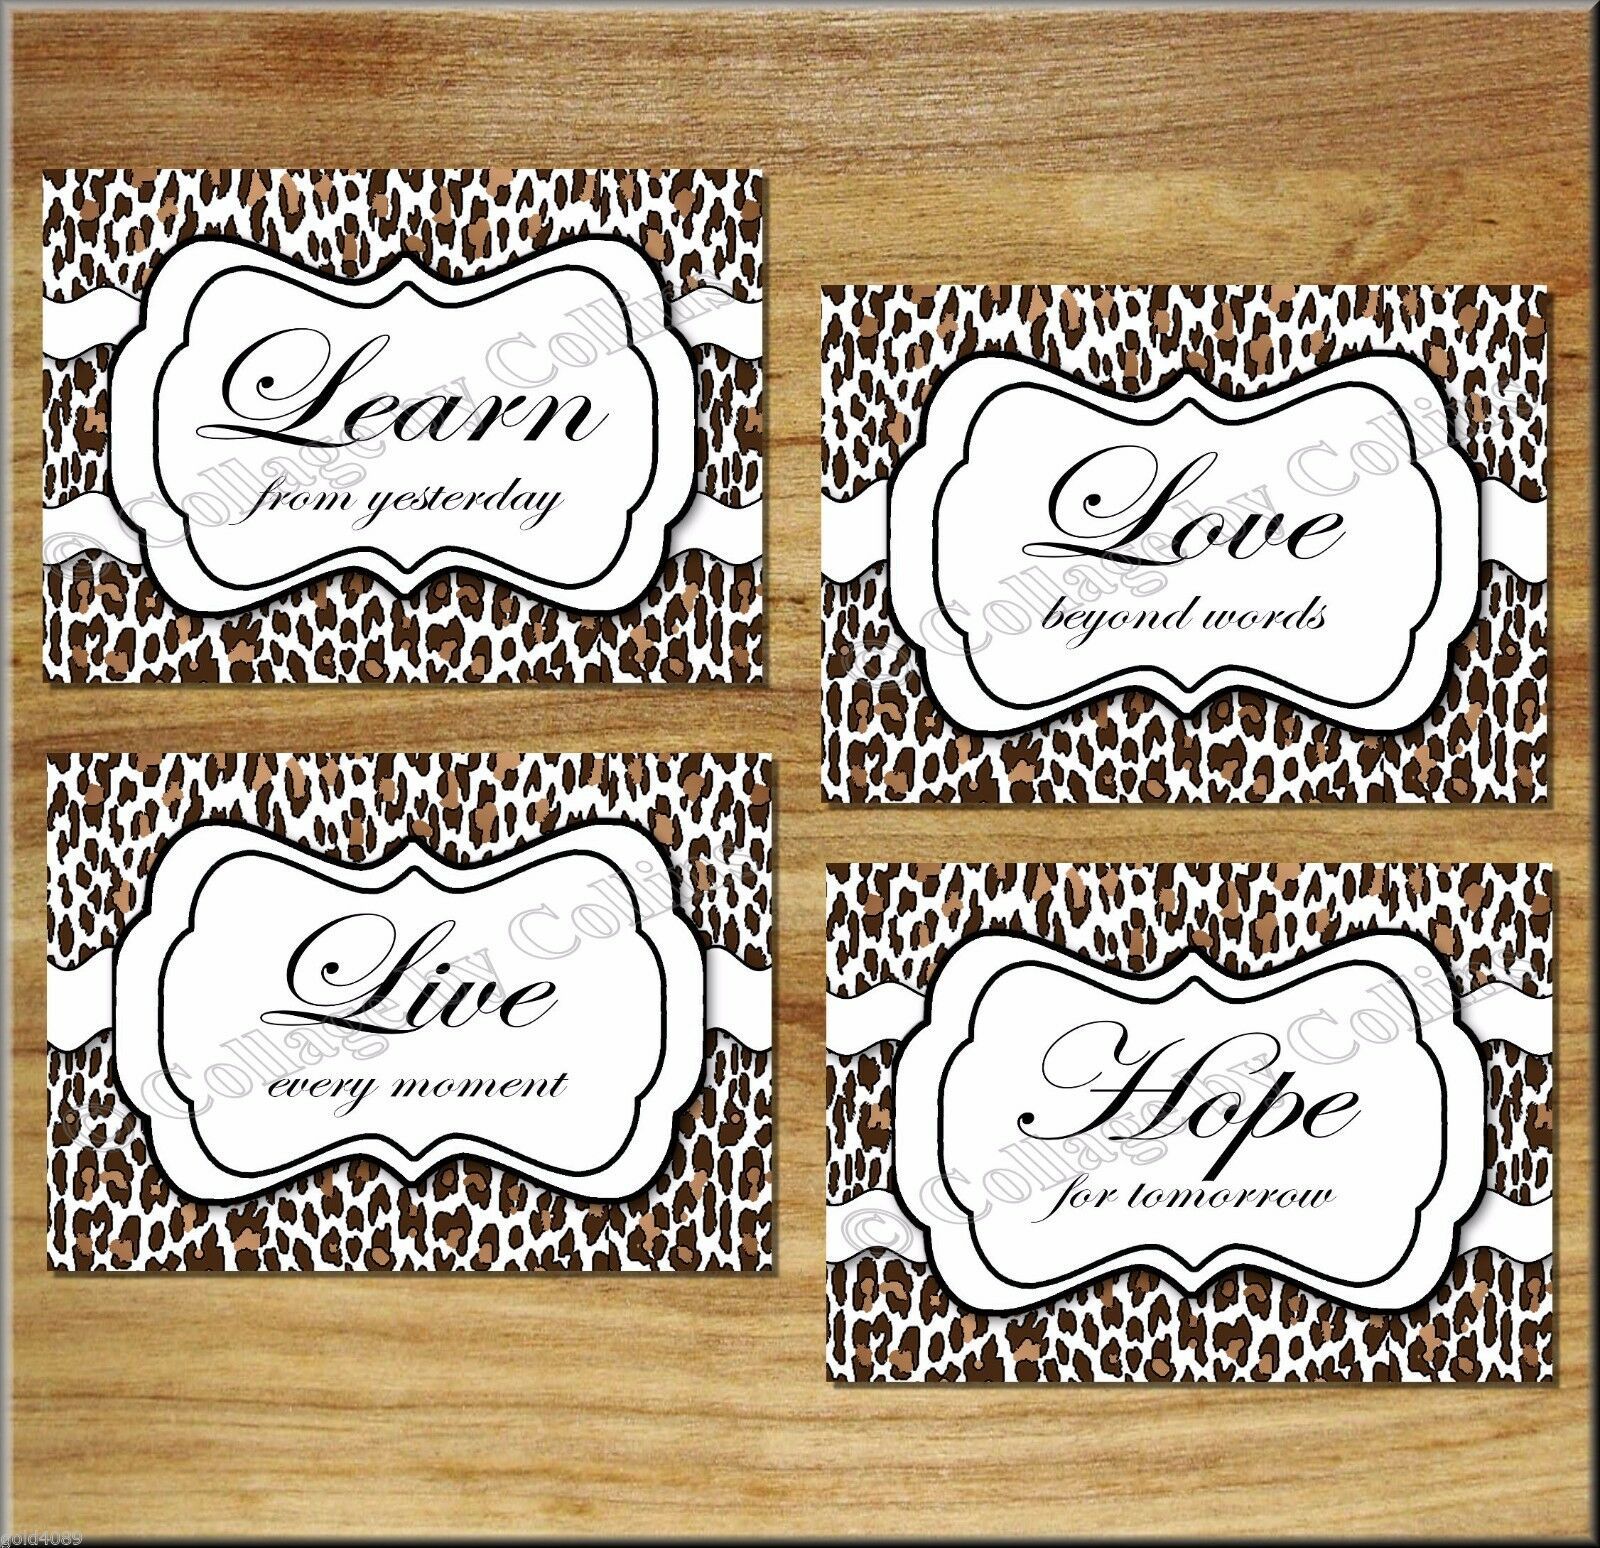 Leopard Wall Art Picture Print Inspirational Quote Love Laugh Live Dream Believe